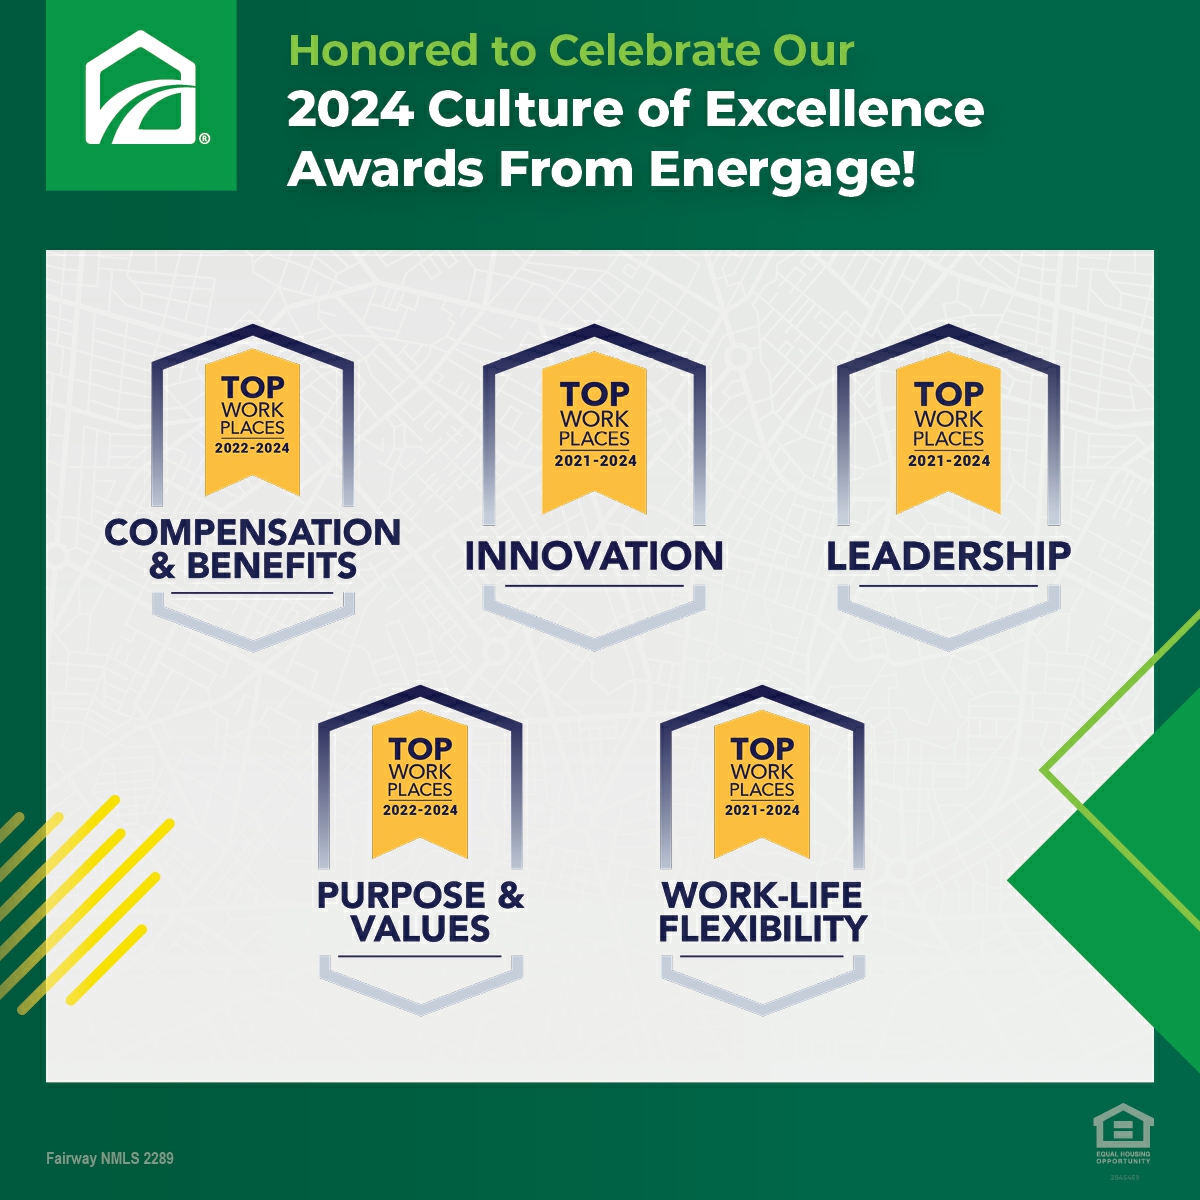 We're honored to celebrate our 2024 Culture of Excellence awards from Energage! Congratulations, #FairwayNation!
#TopWorkplace